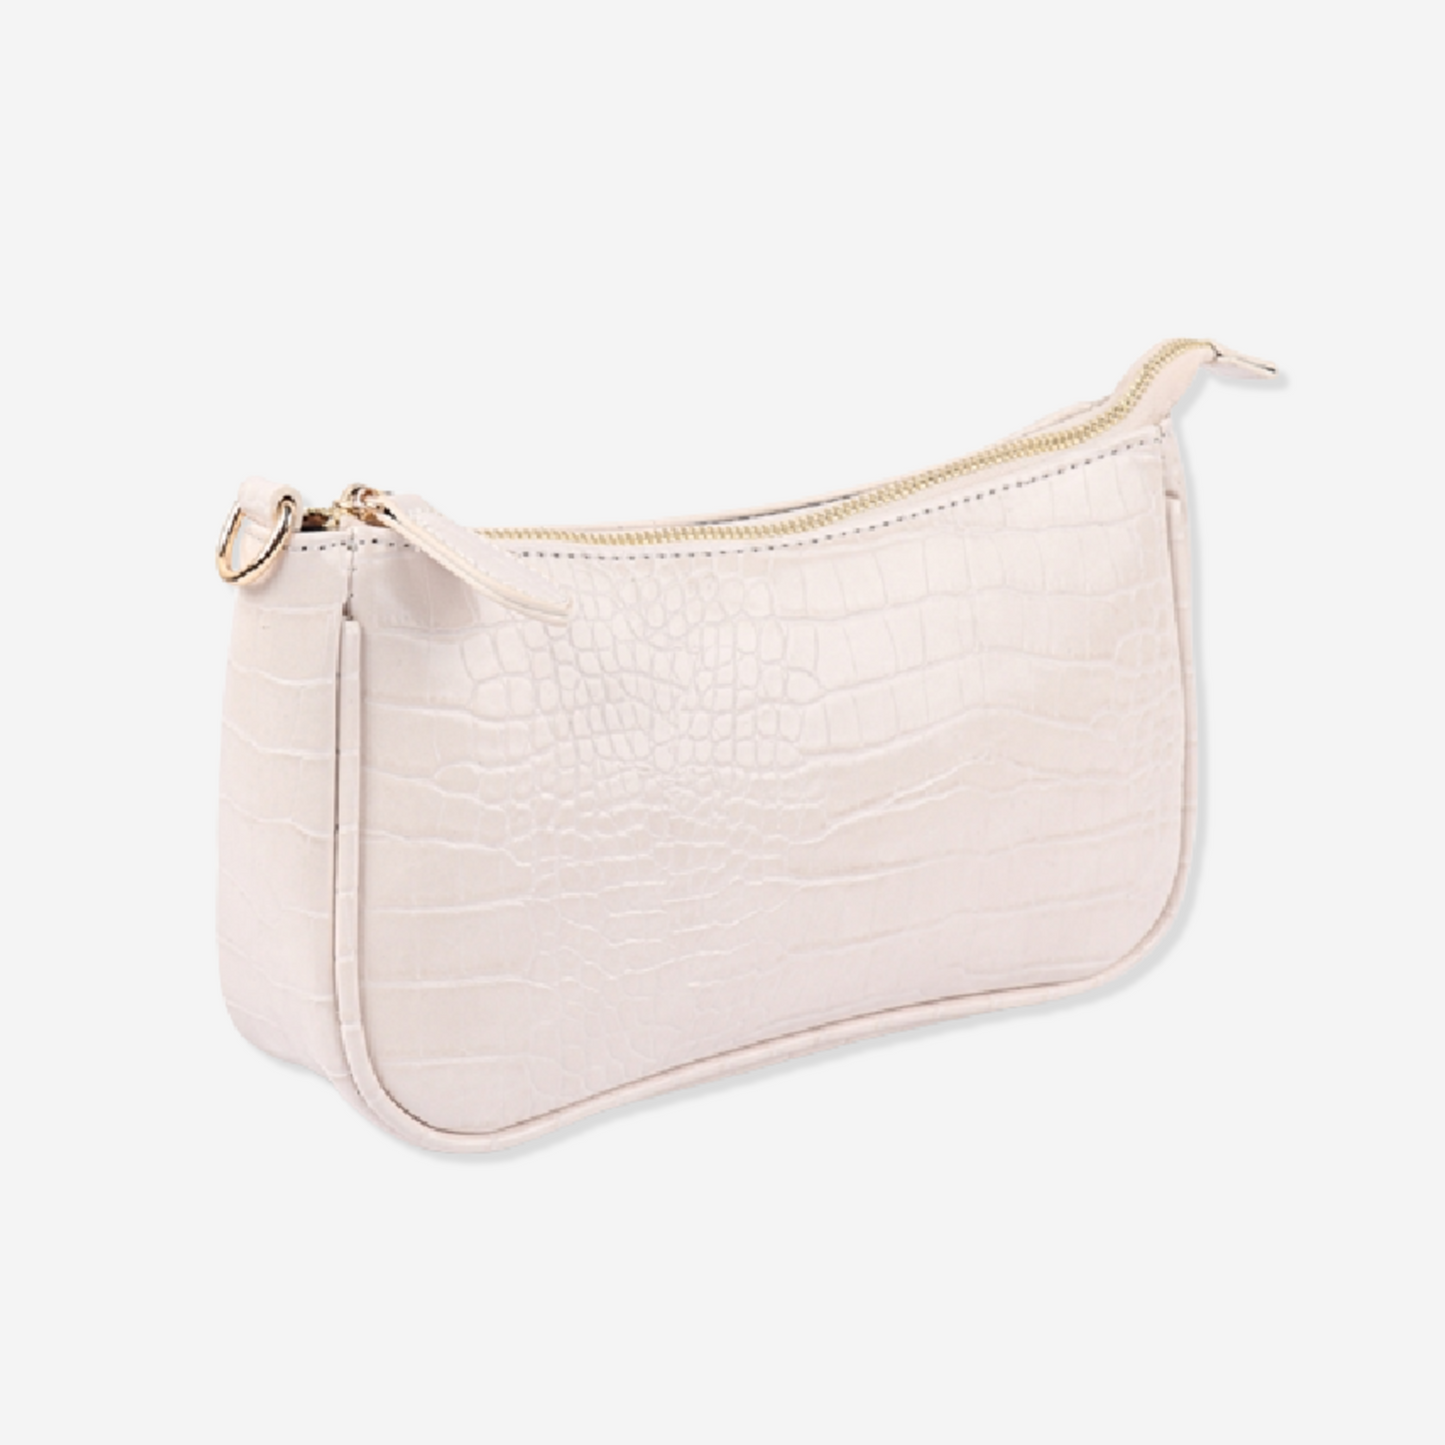 CONVERTIBLE FAUX LEATHER CROCODILE TEXTURED BAG IVORY